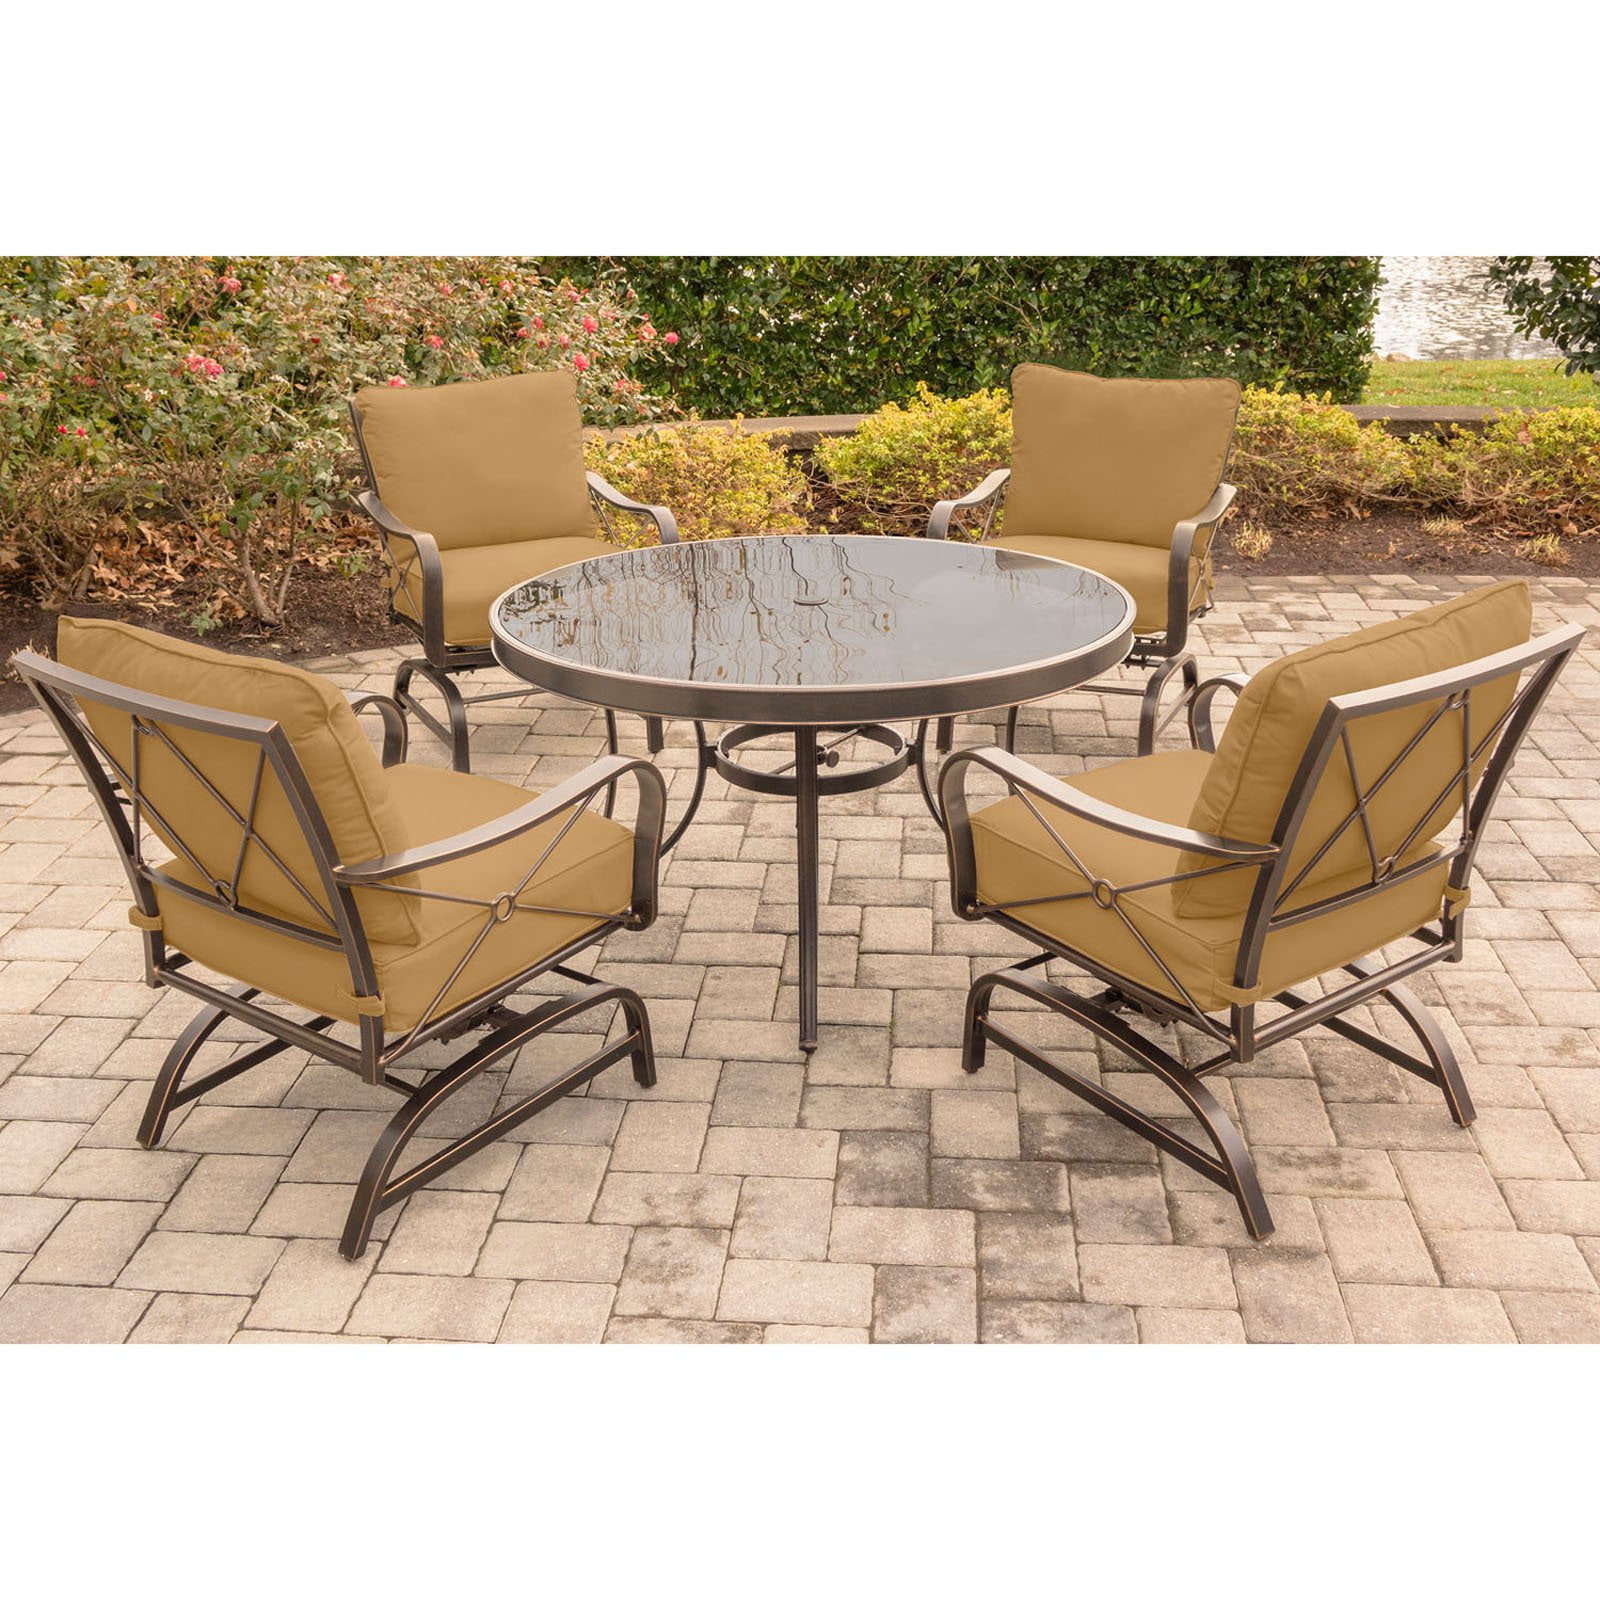 Hanover Outdoor Summer Nights 5 Piece, Sears Fire Pit Table Set